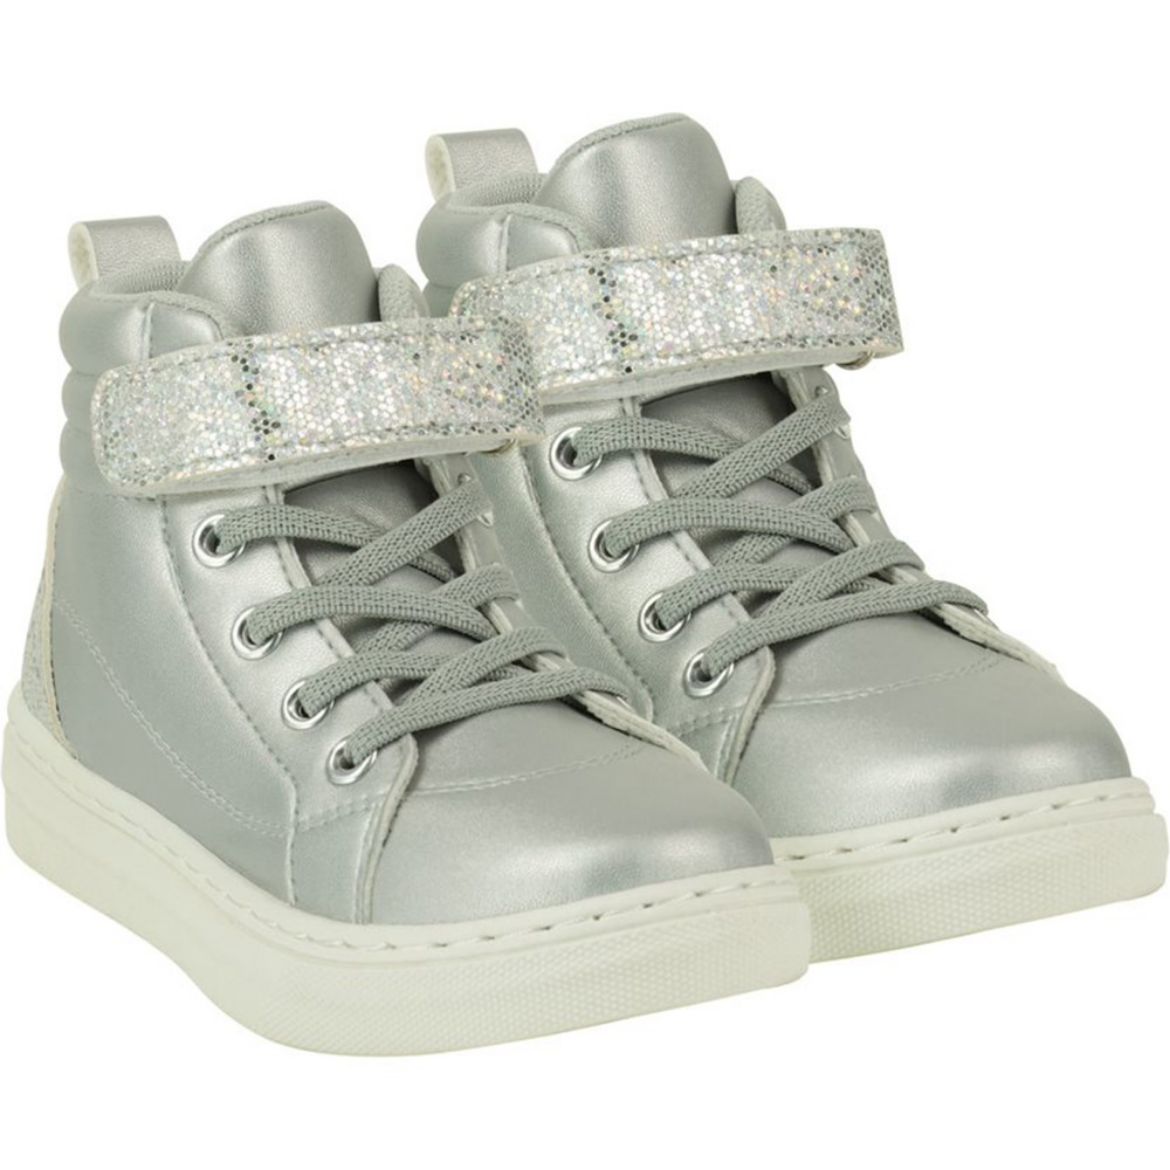 Picture of A Dee Girls 'Glitzy' Silver High-tops